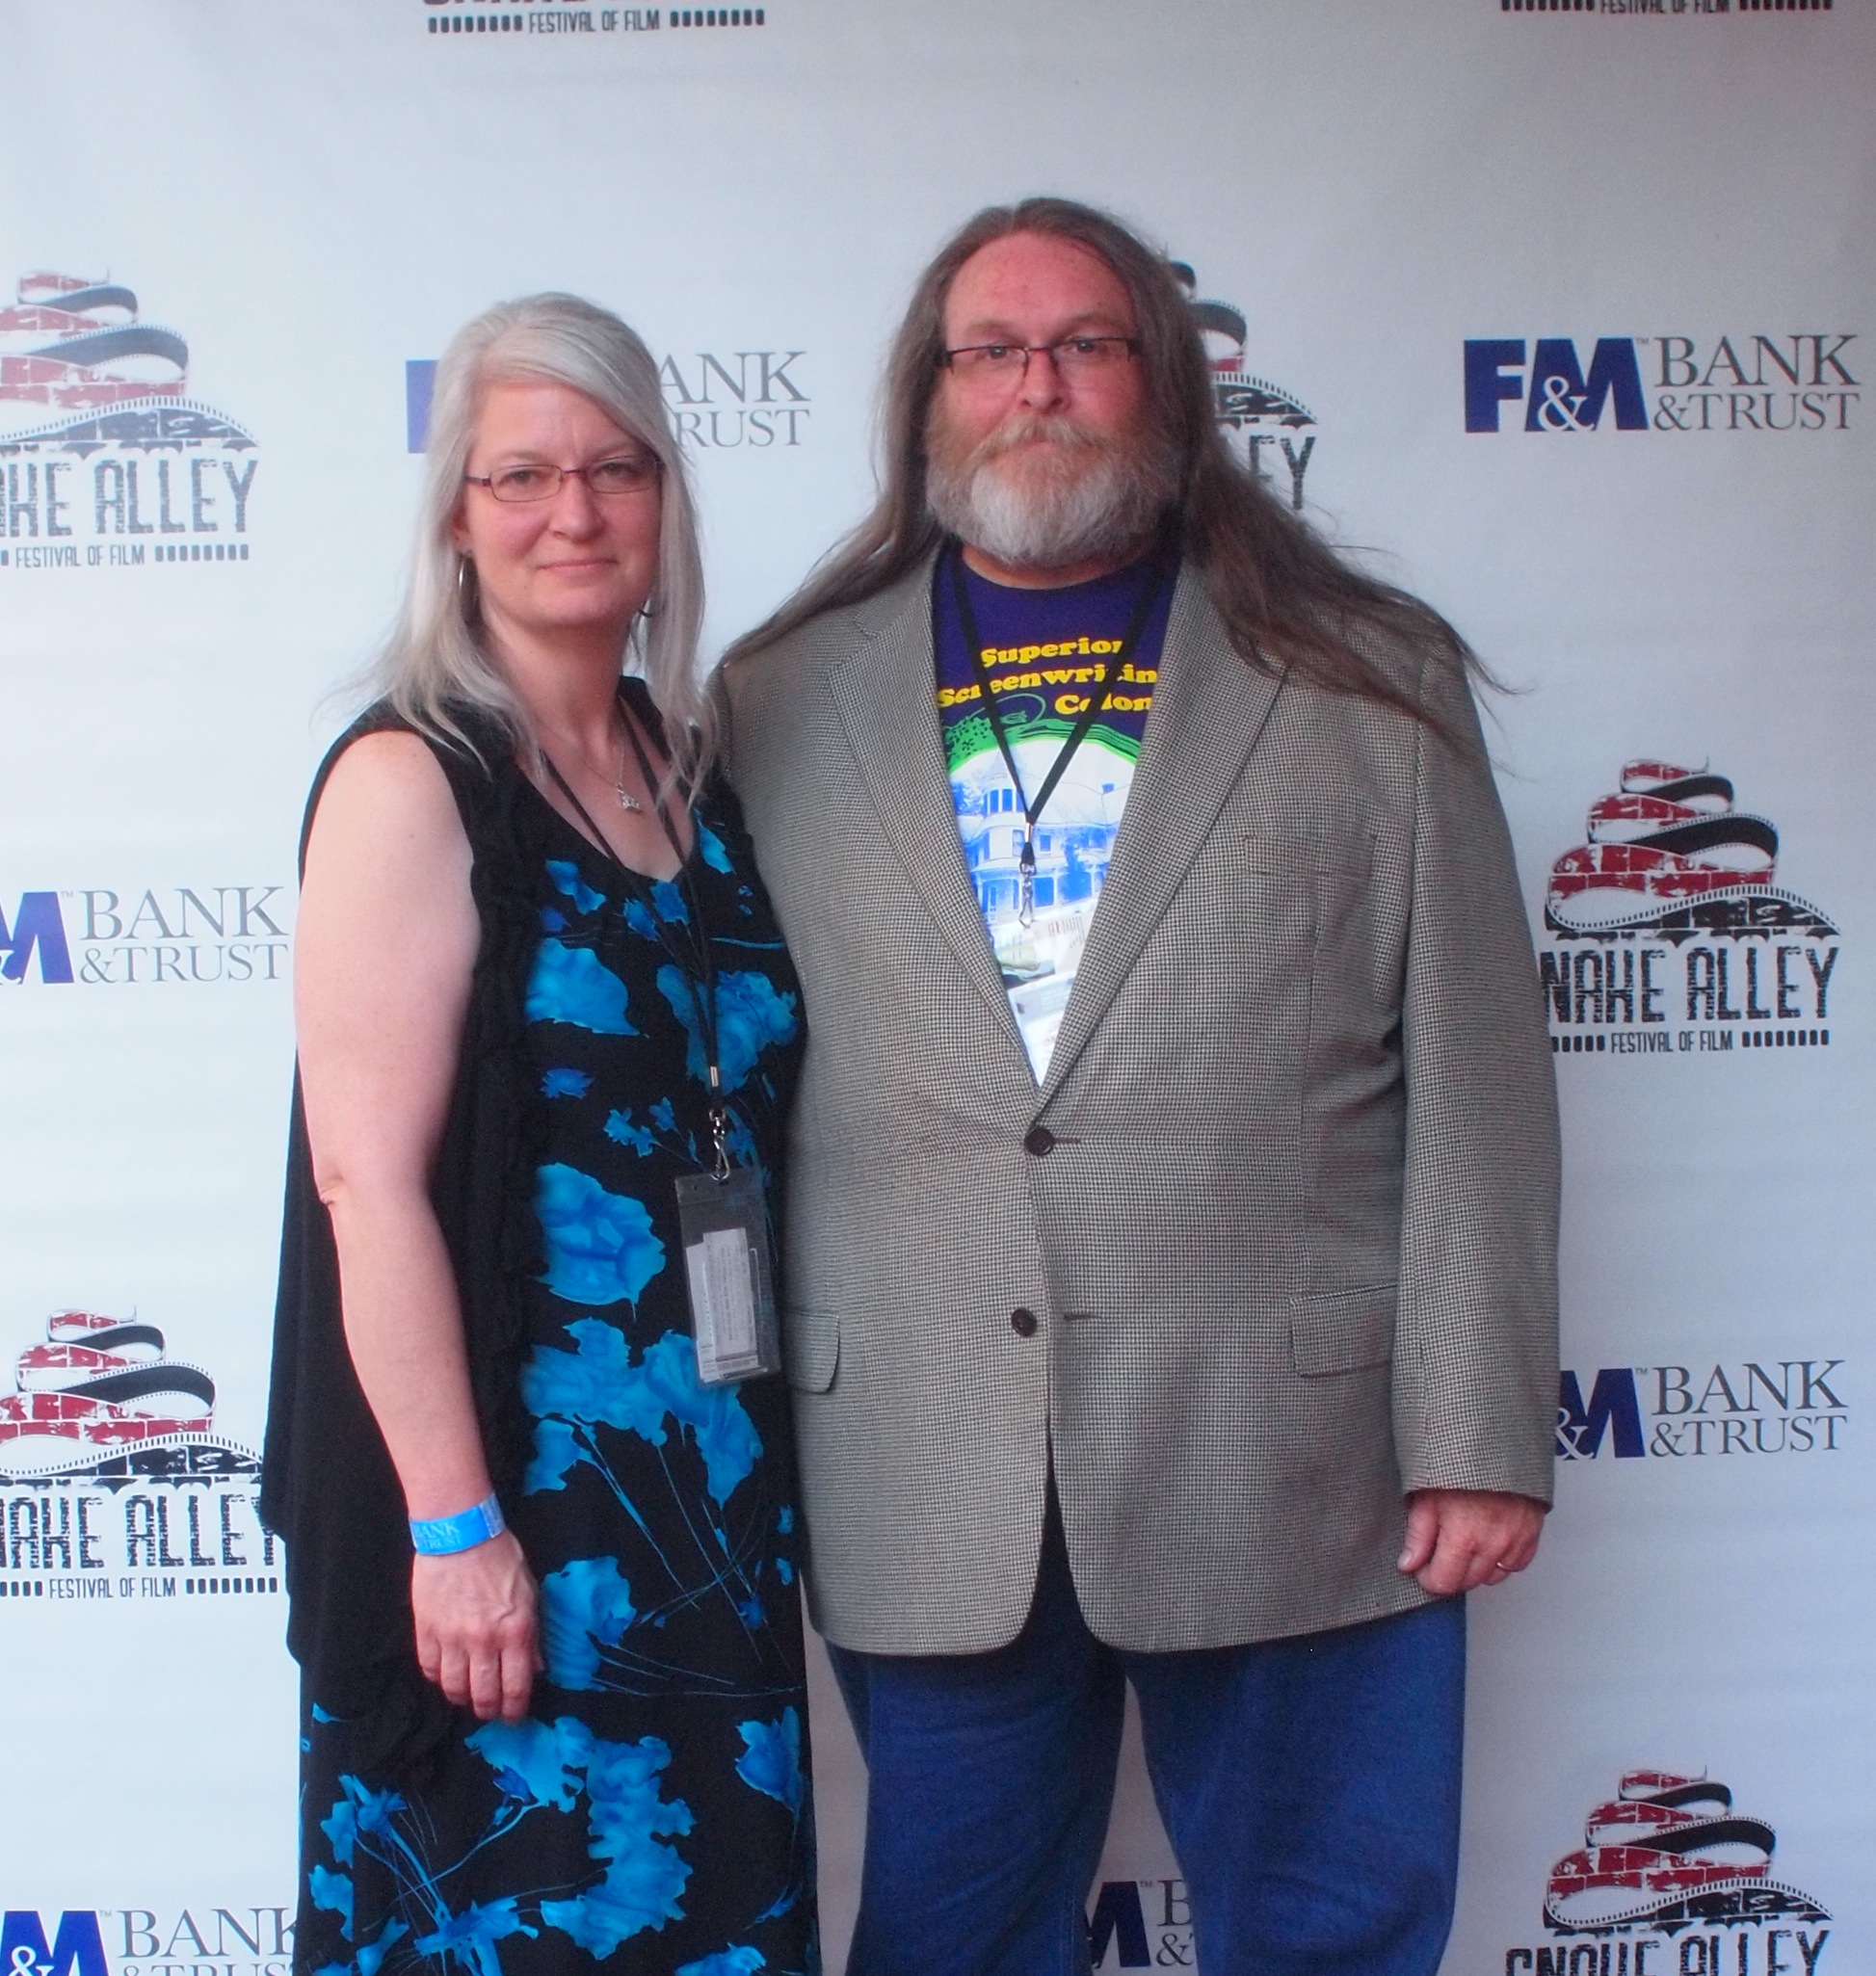 With Kathy on the red carpet at the 2013 Snake Alley Festival of Film